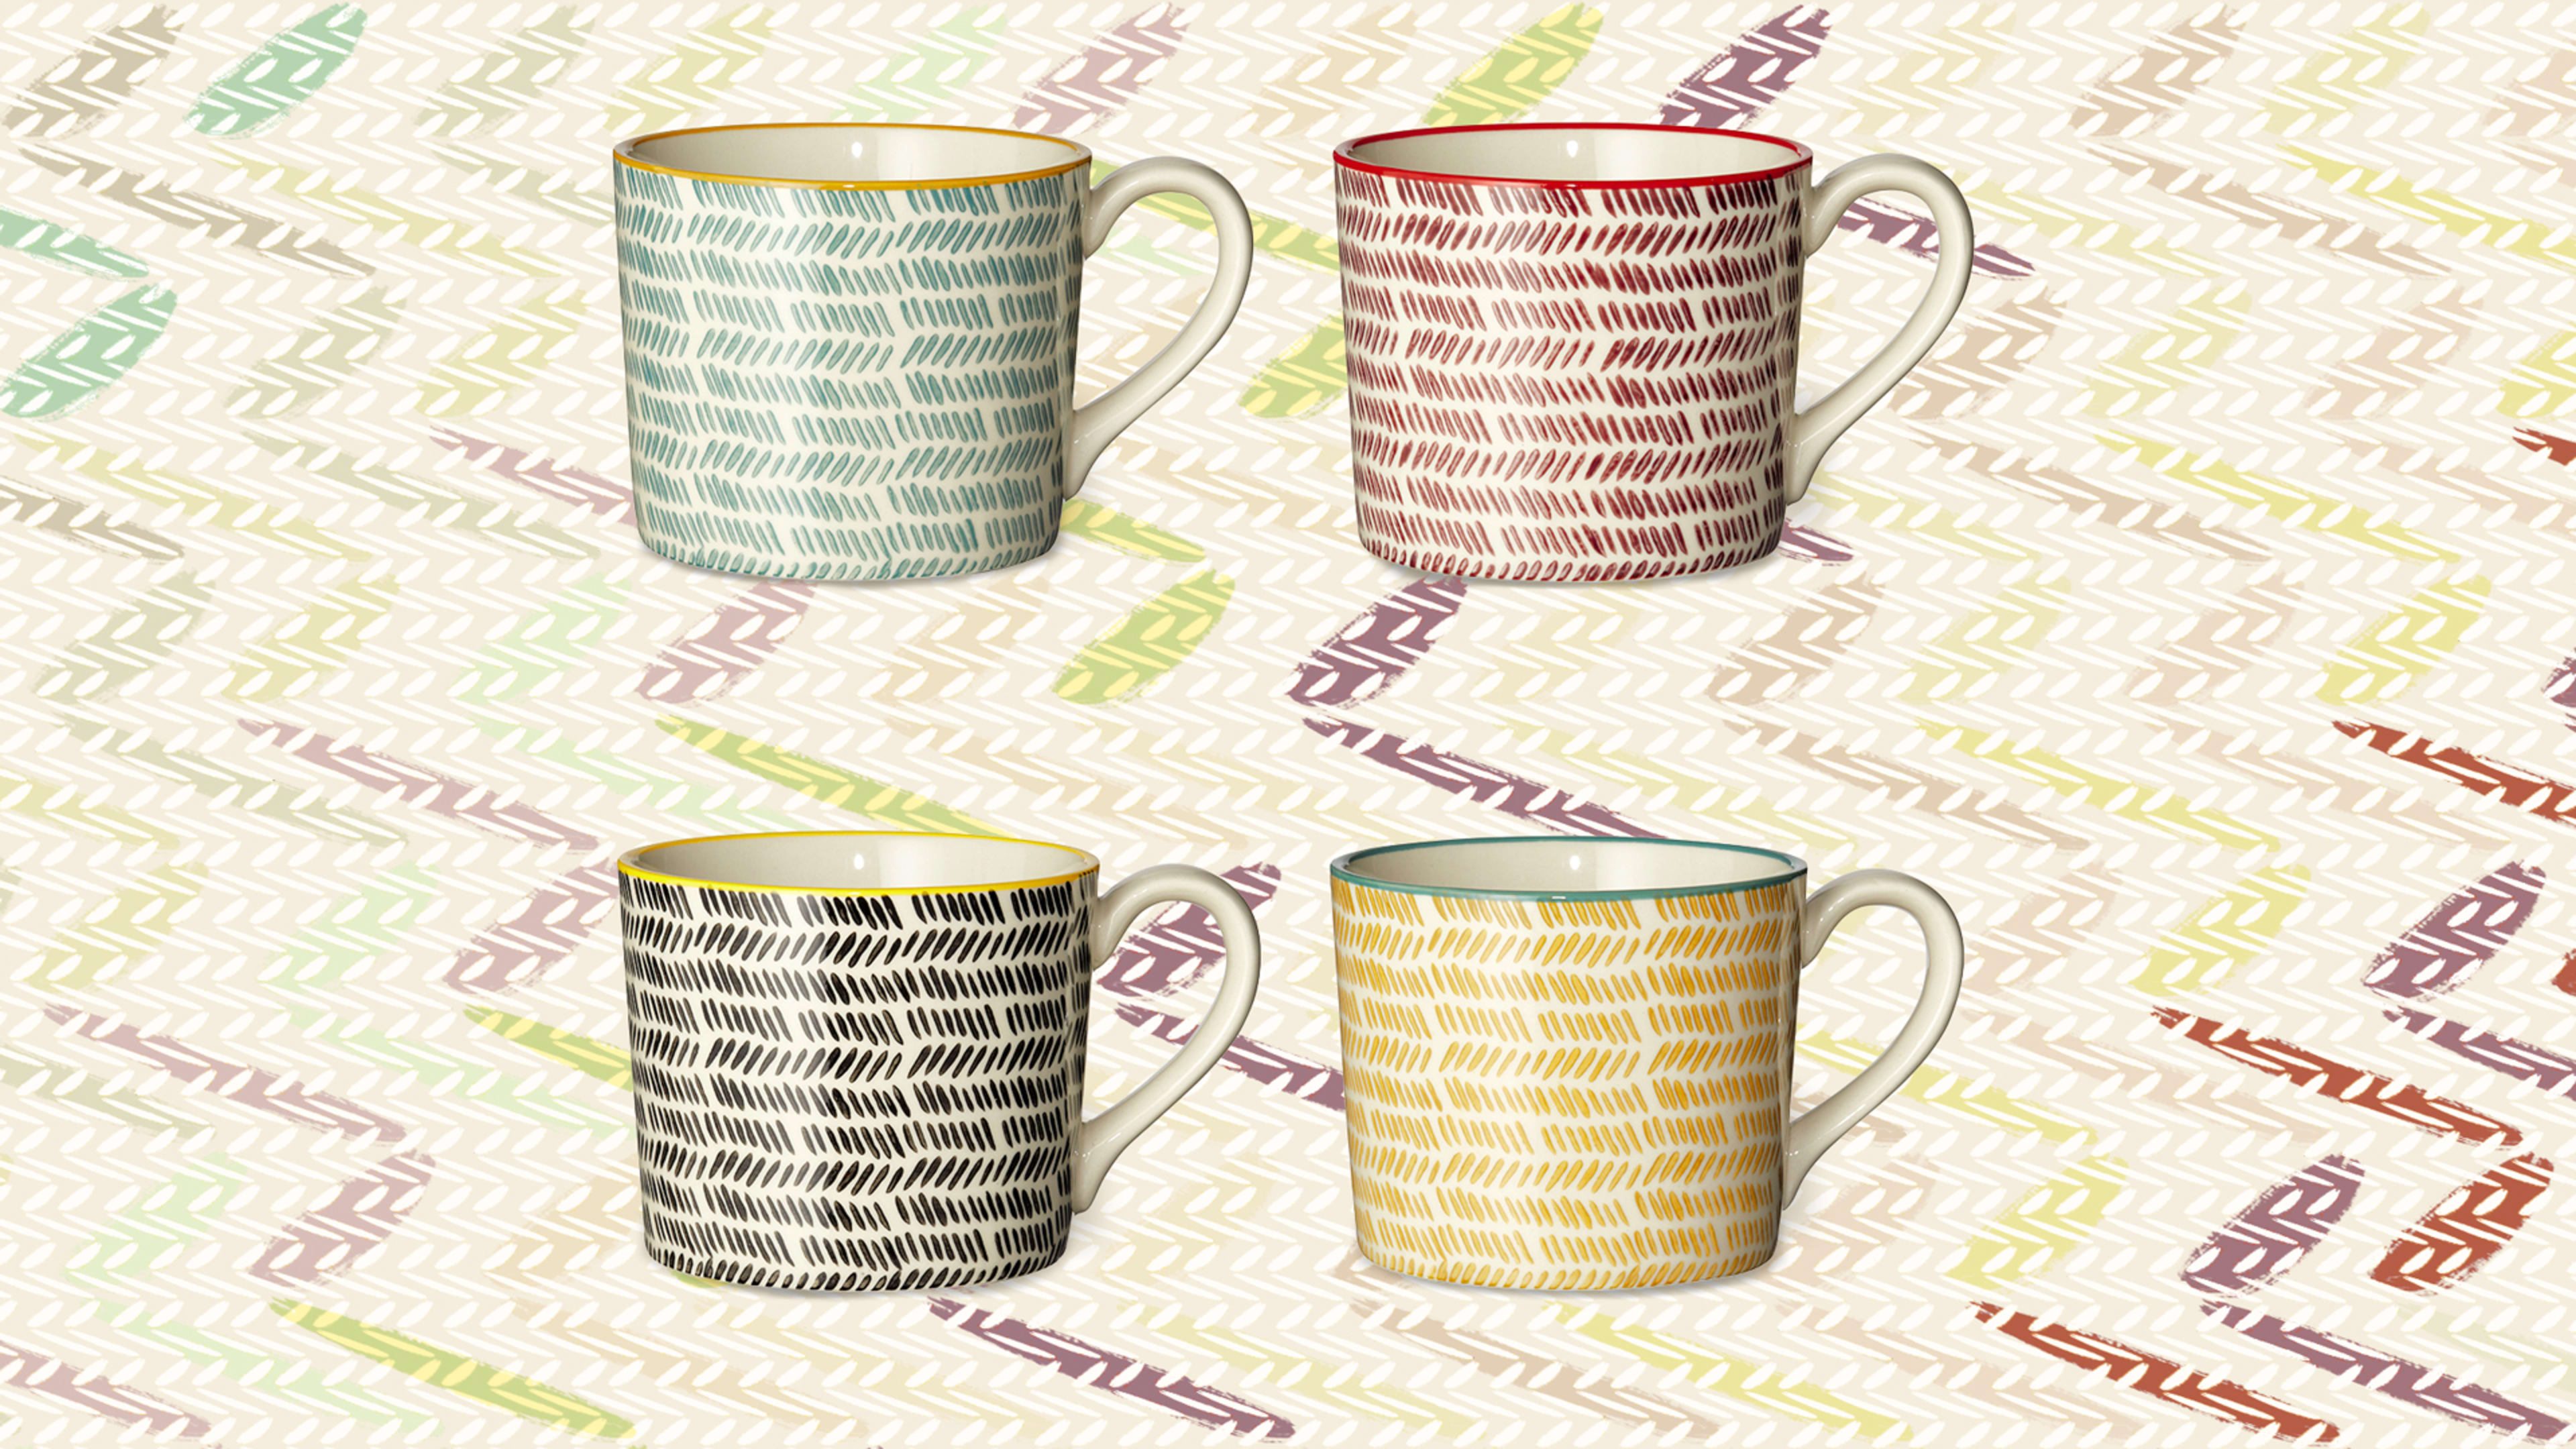 Looking for a pick-me-up? Treat yourself to one of these designer coffee mugs, and sip in style